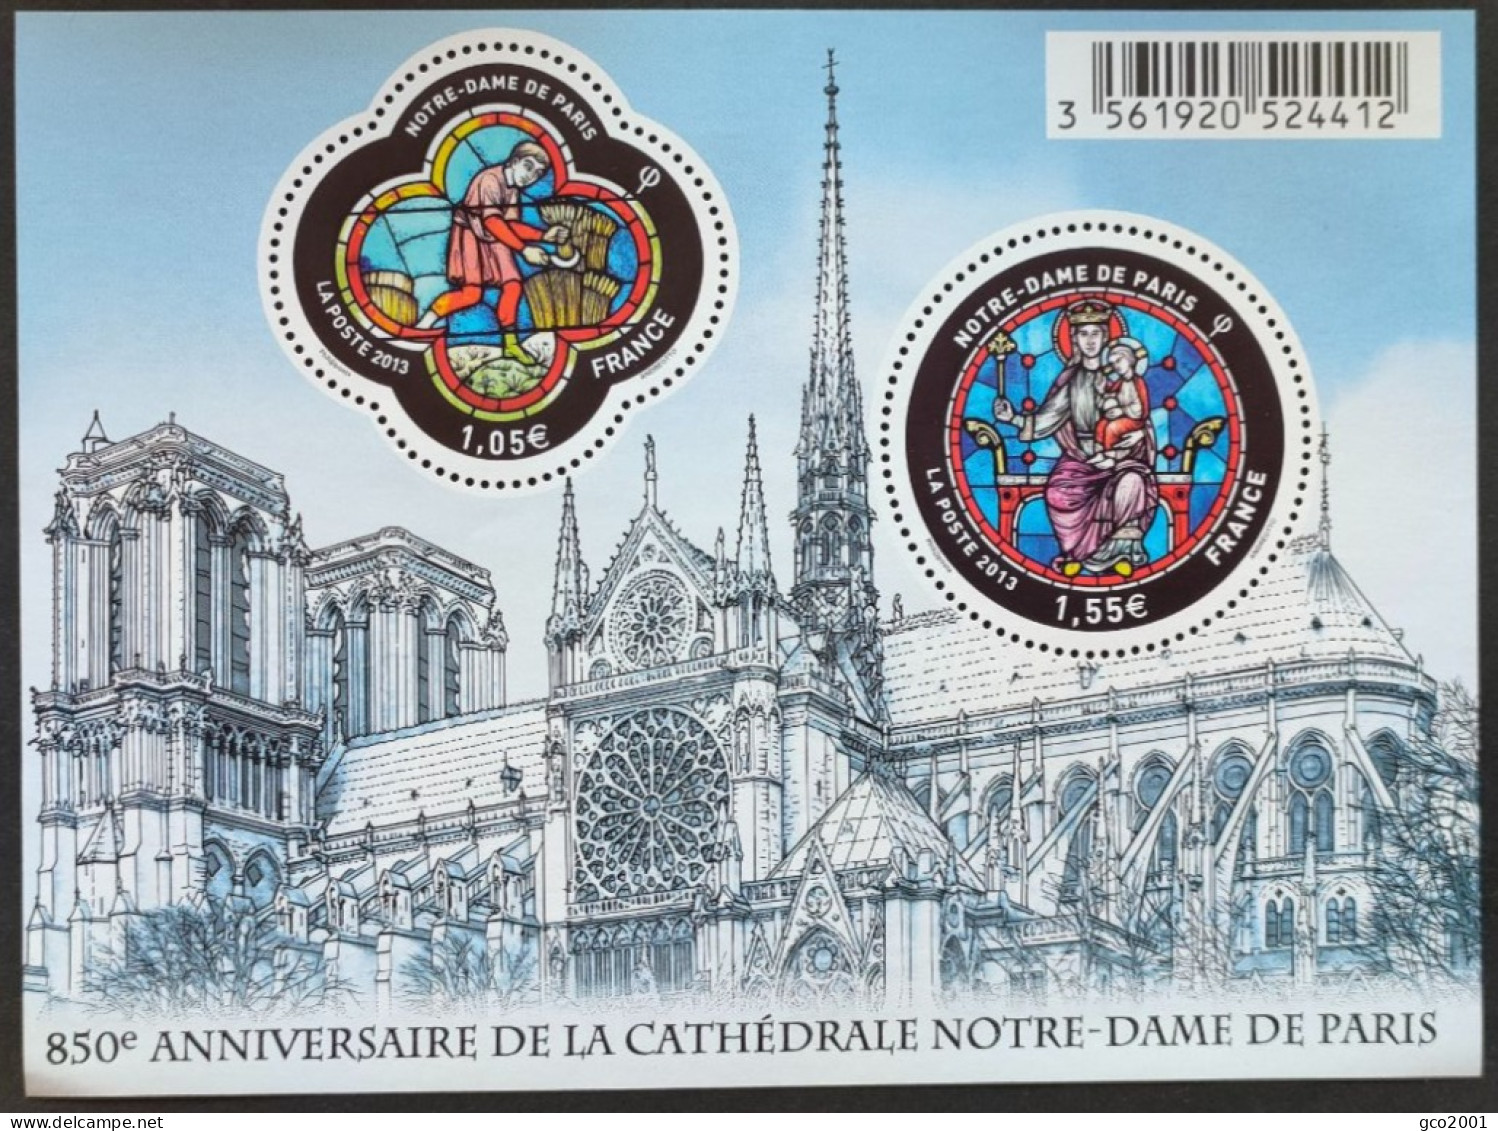 FRANCE / YT F4714 / NOTRE DAME DE PARIS - VITRAIL - CATHEDRALE / NEUF ** / MNH - 2008-2013 Marianna Di Beaujard